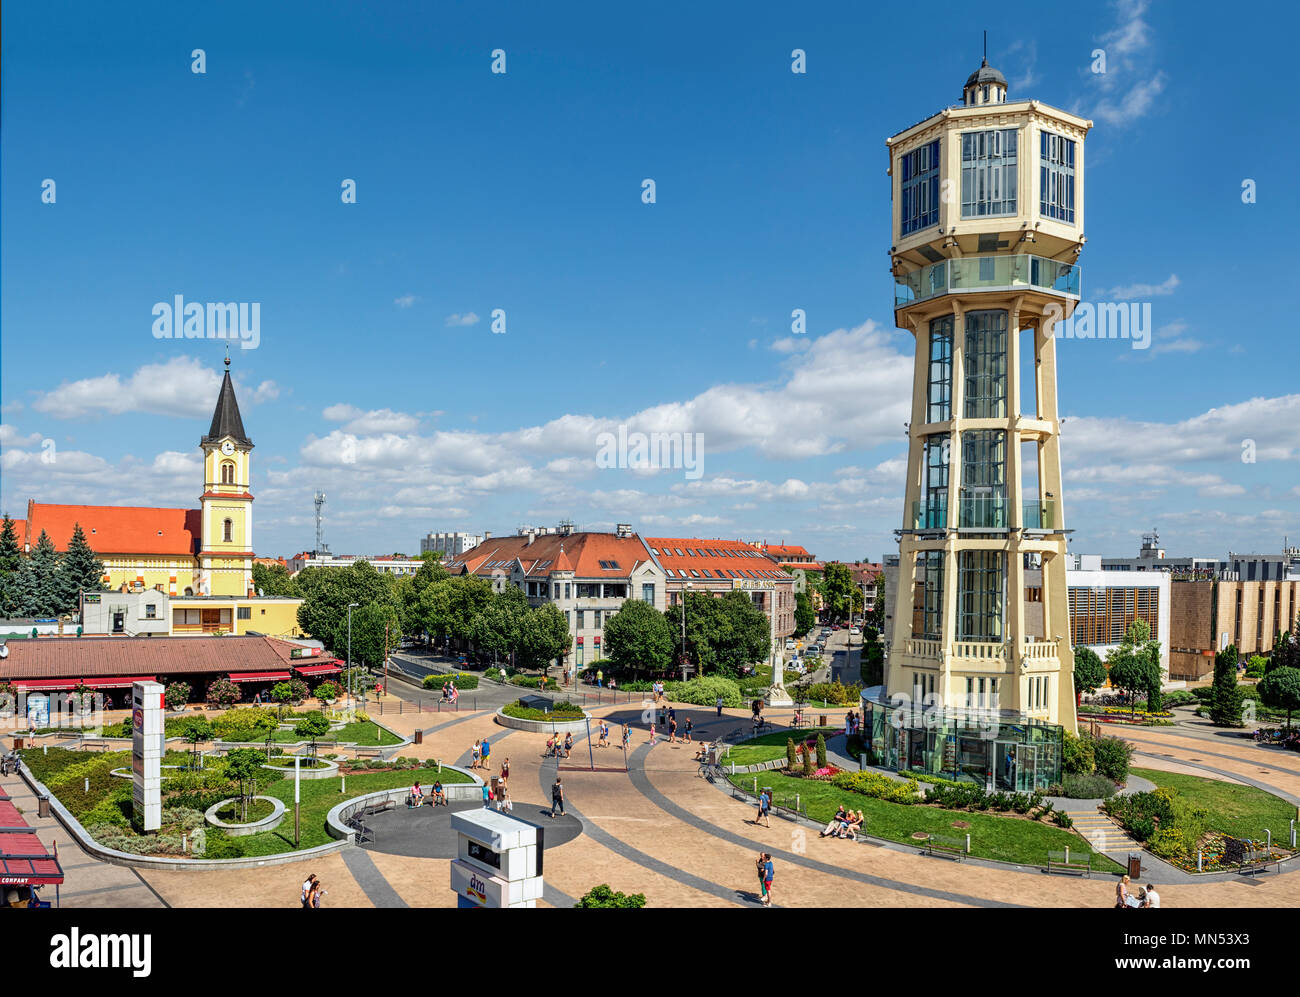 Siófok city is one of most popular holiday destinations.Hungarians often call the town as the capital of Balaton.Old wooden water tower on city center Stock Photo